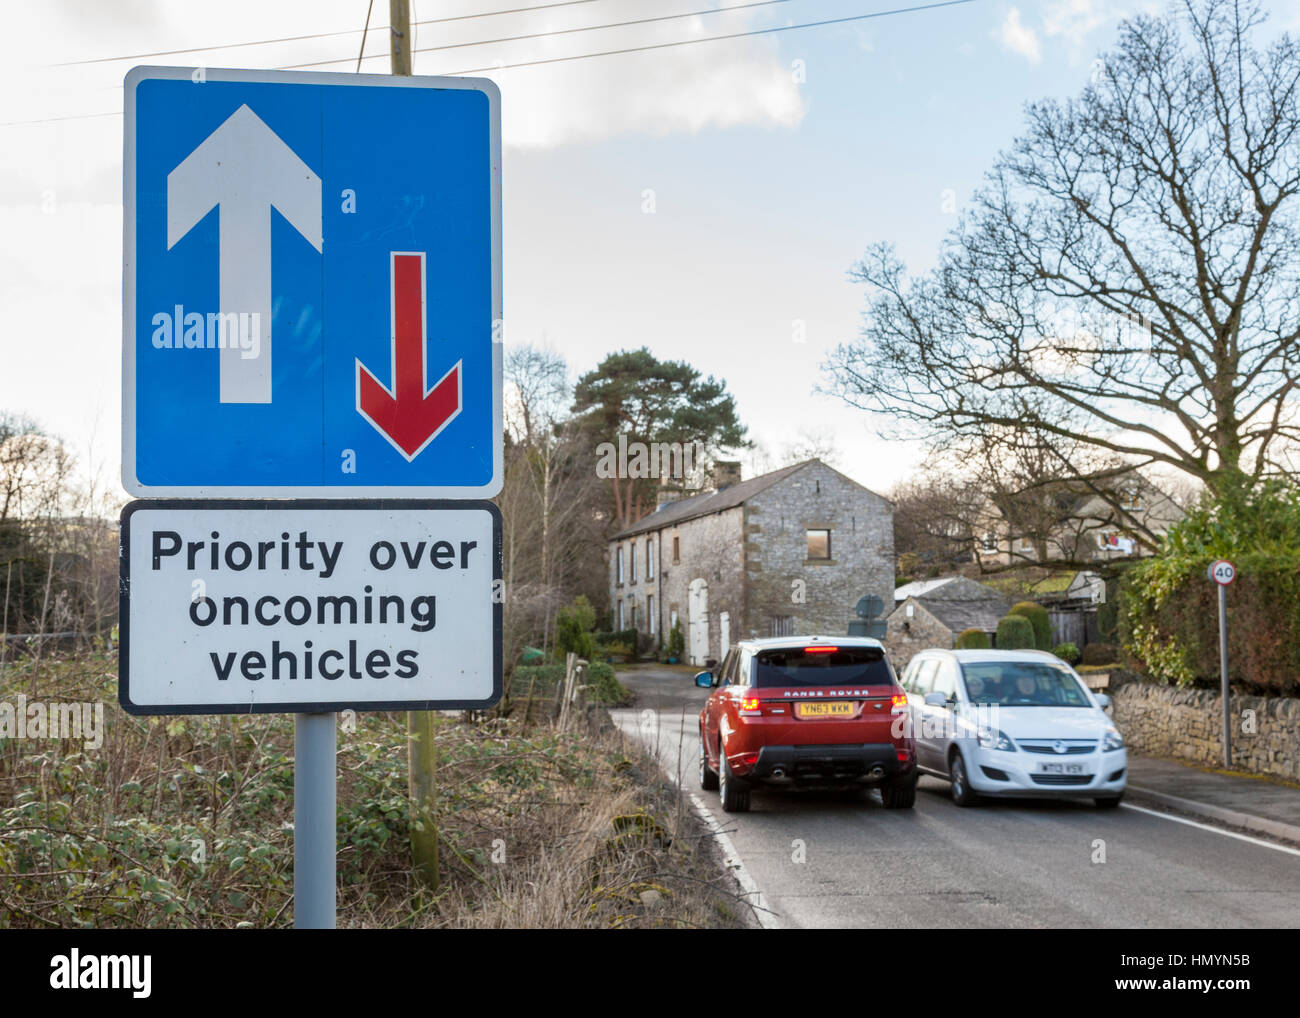 Car driver ignoring road sign giving priority over oncoming vehicles , Brough, Derbyshire. England, UK Stock Photo